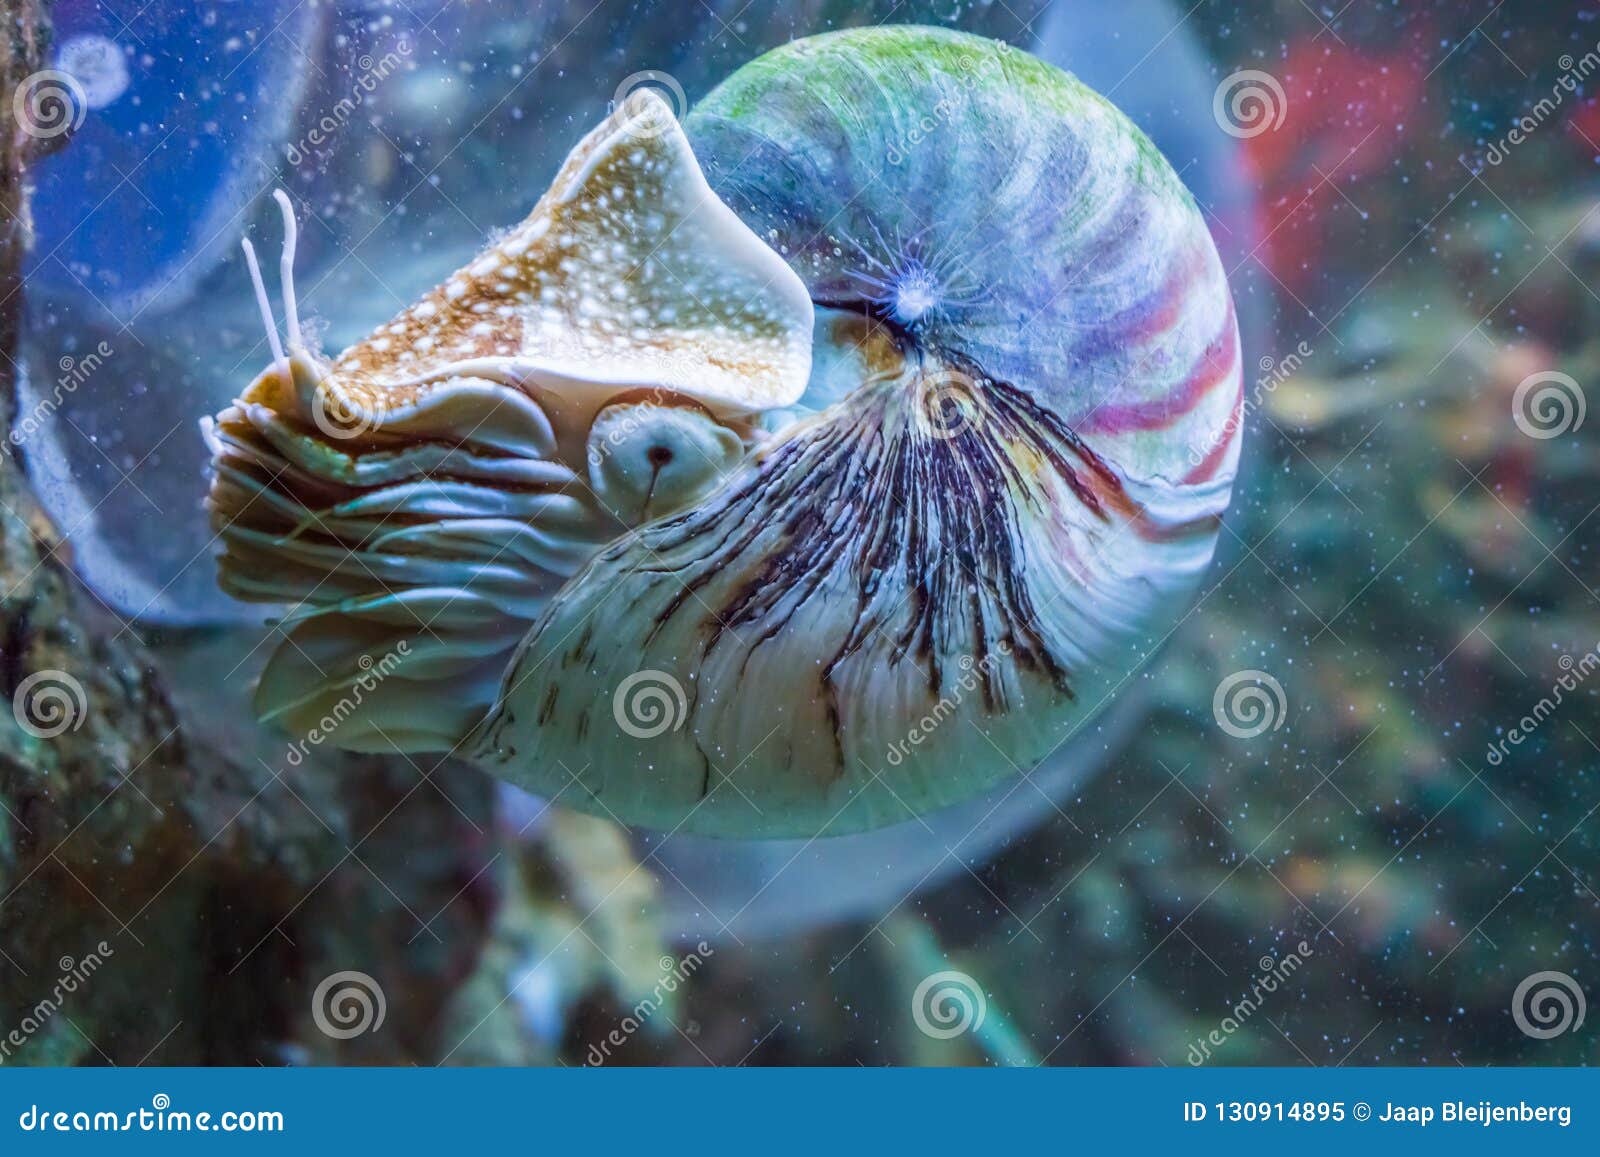 Nautilus Squid a Rare and Beautiful Living Shell Fossil Underwater Sea  Animal Stock Image - Image of aquatic, cephalopods: 130914895